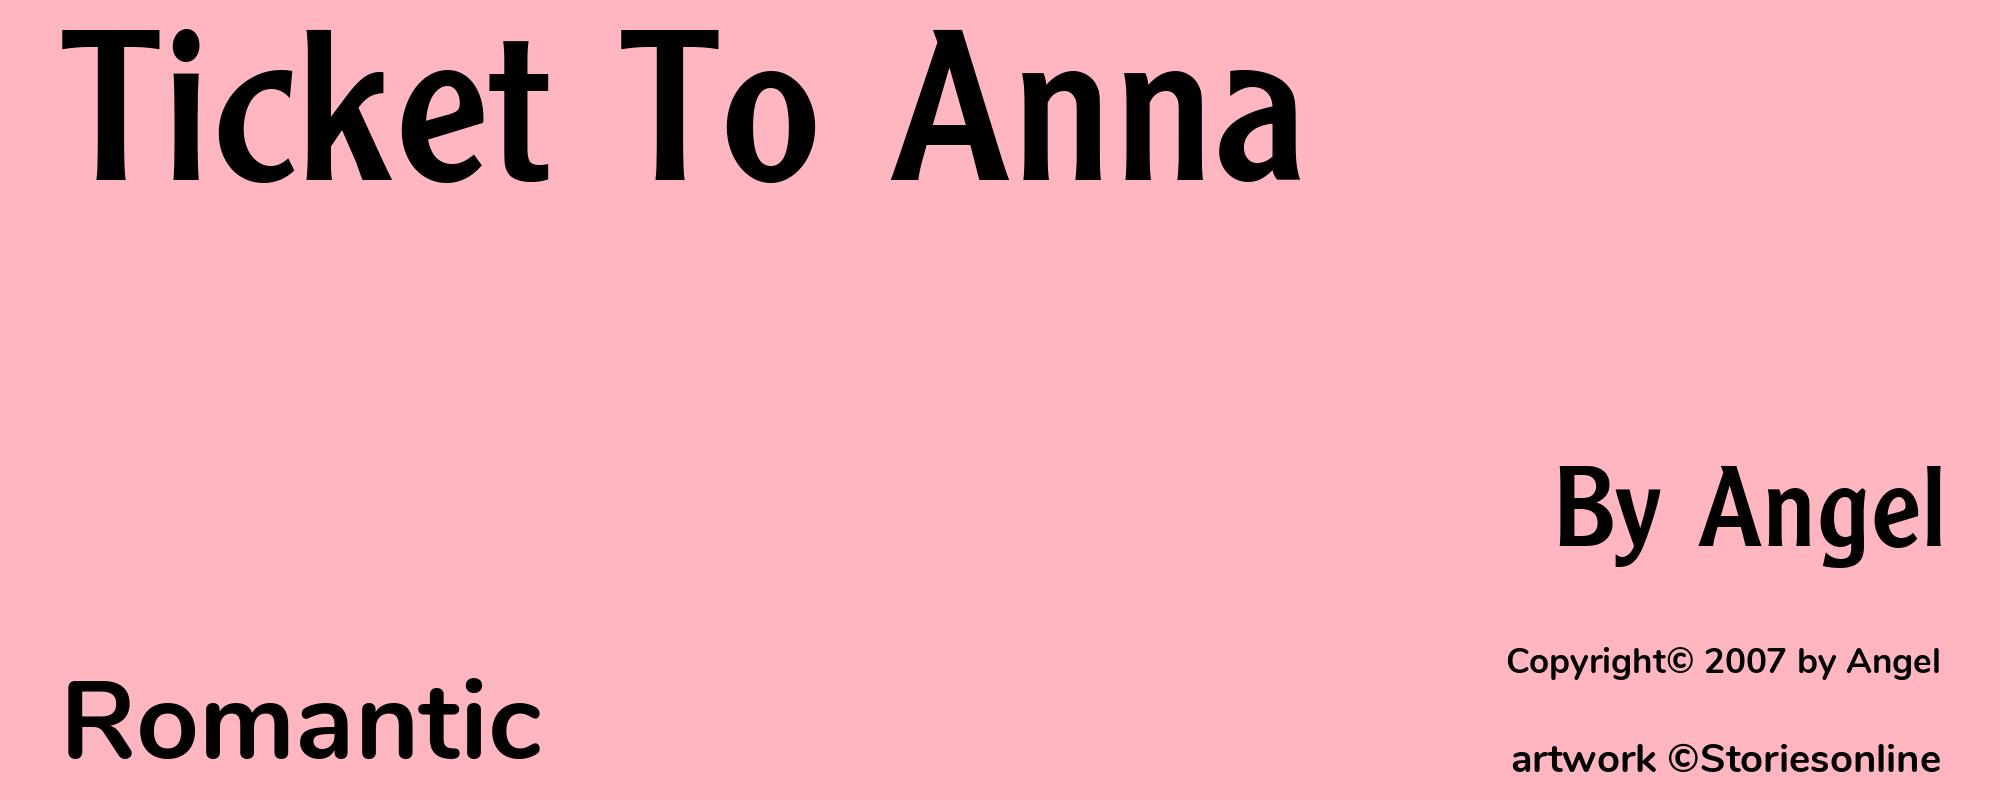 Ticket To Anna - Cover